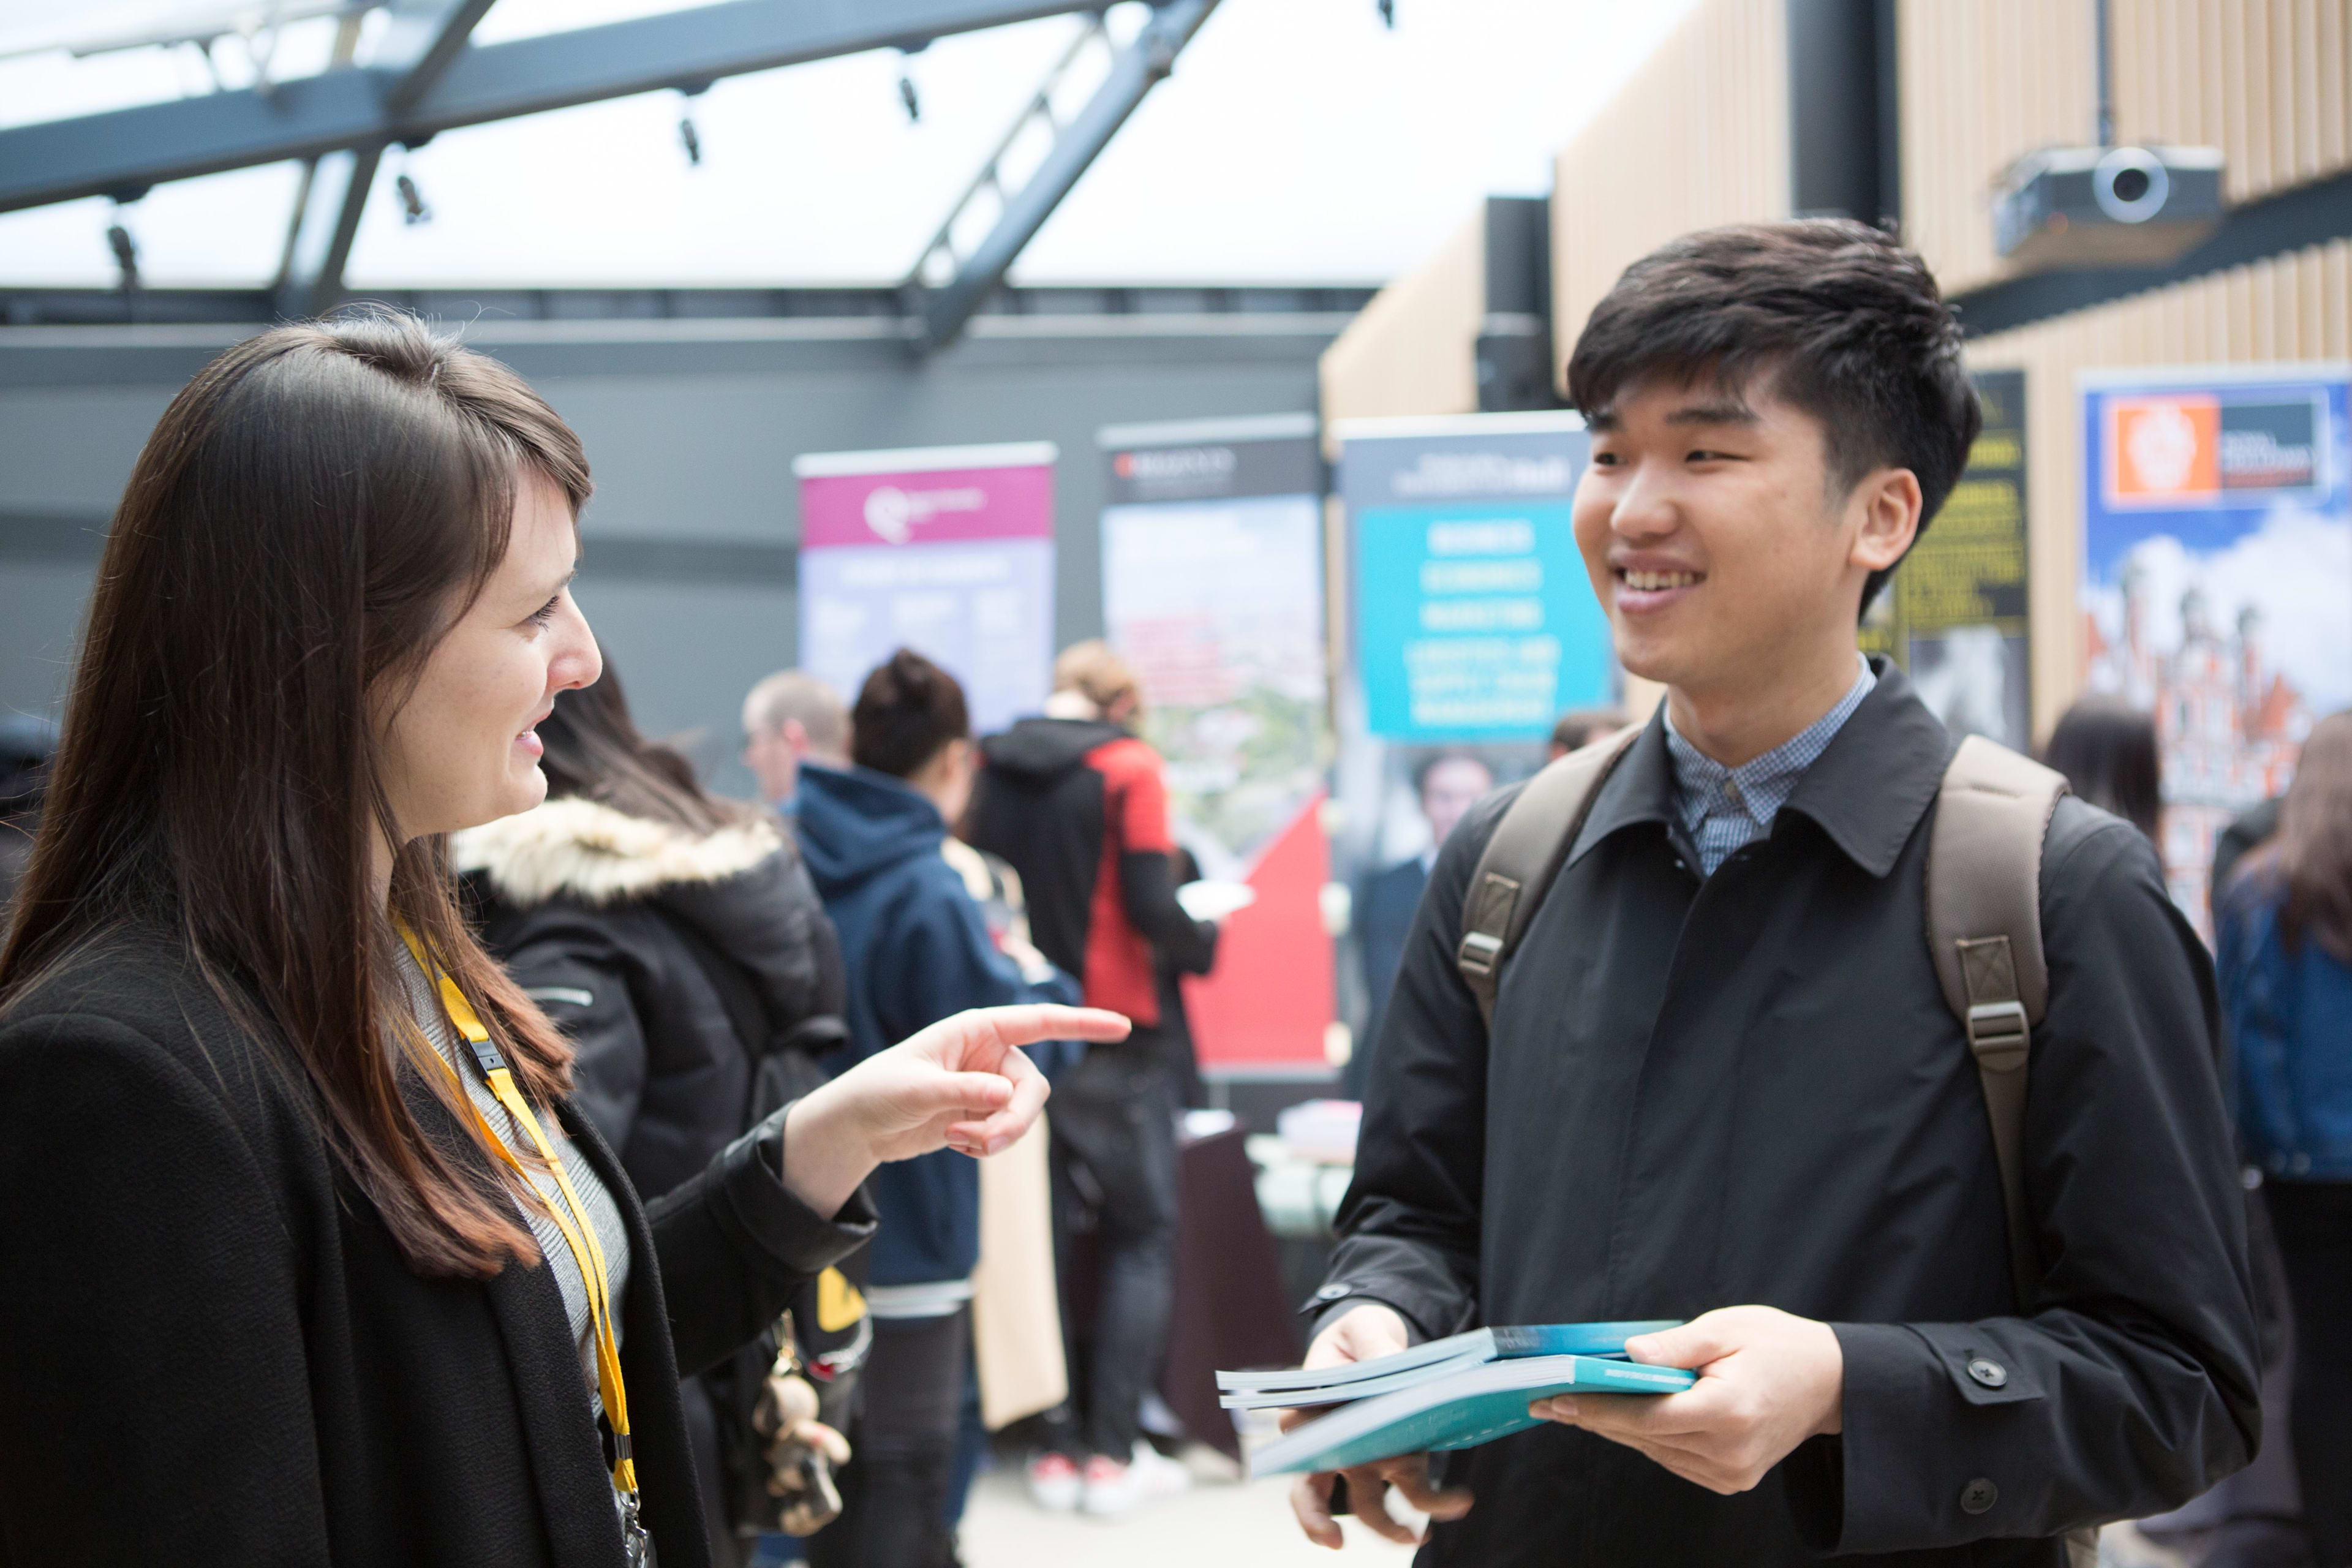 International student speaking to representative at University exhibition stand